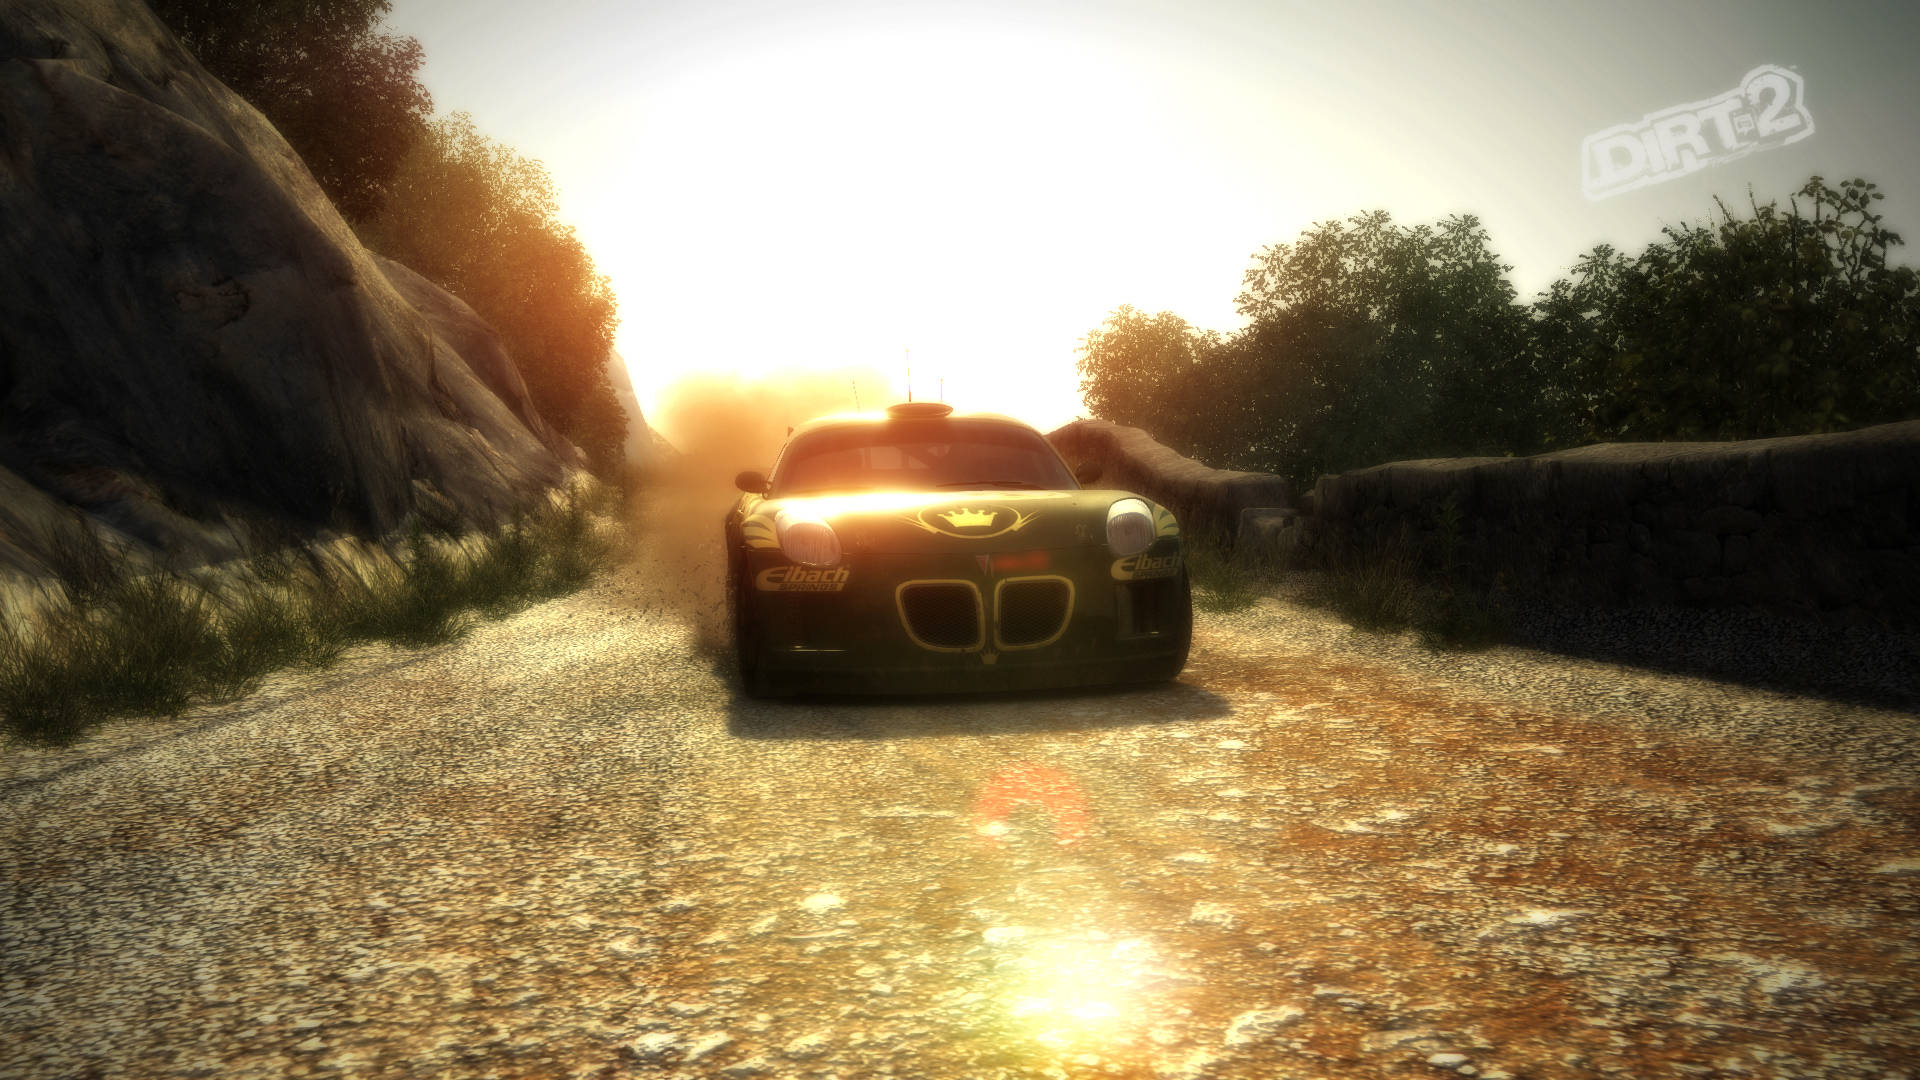 Intense Racing in Dirt Rally with Pontiac Solstice Wallpaper